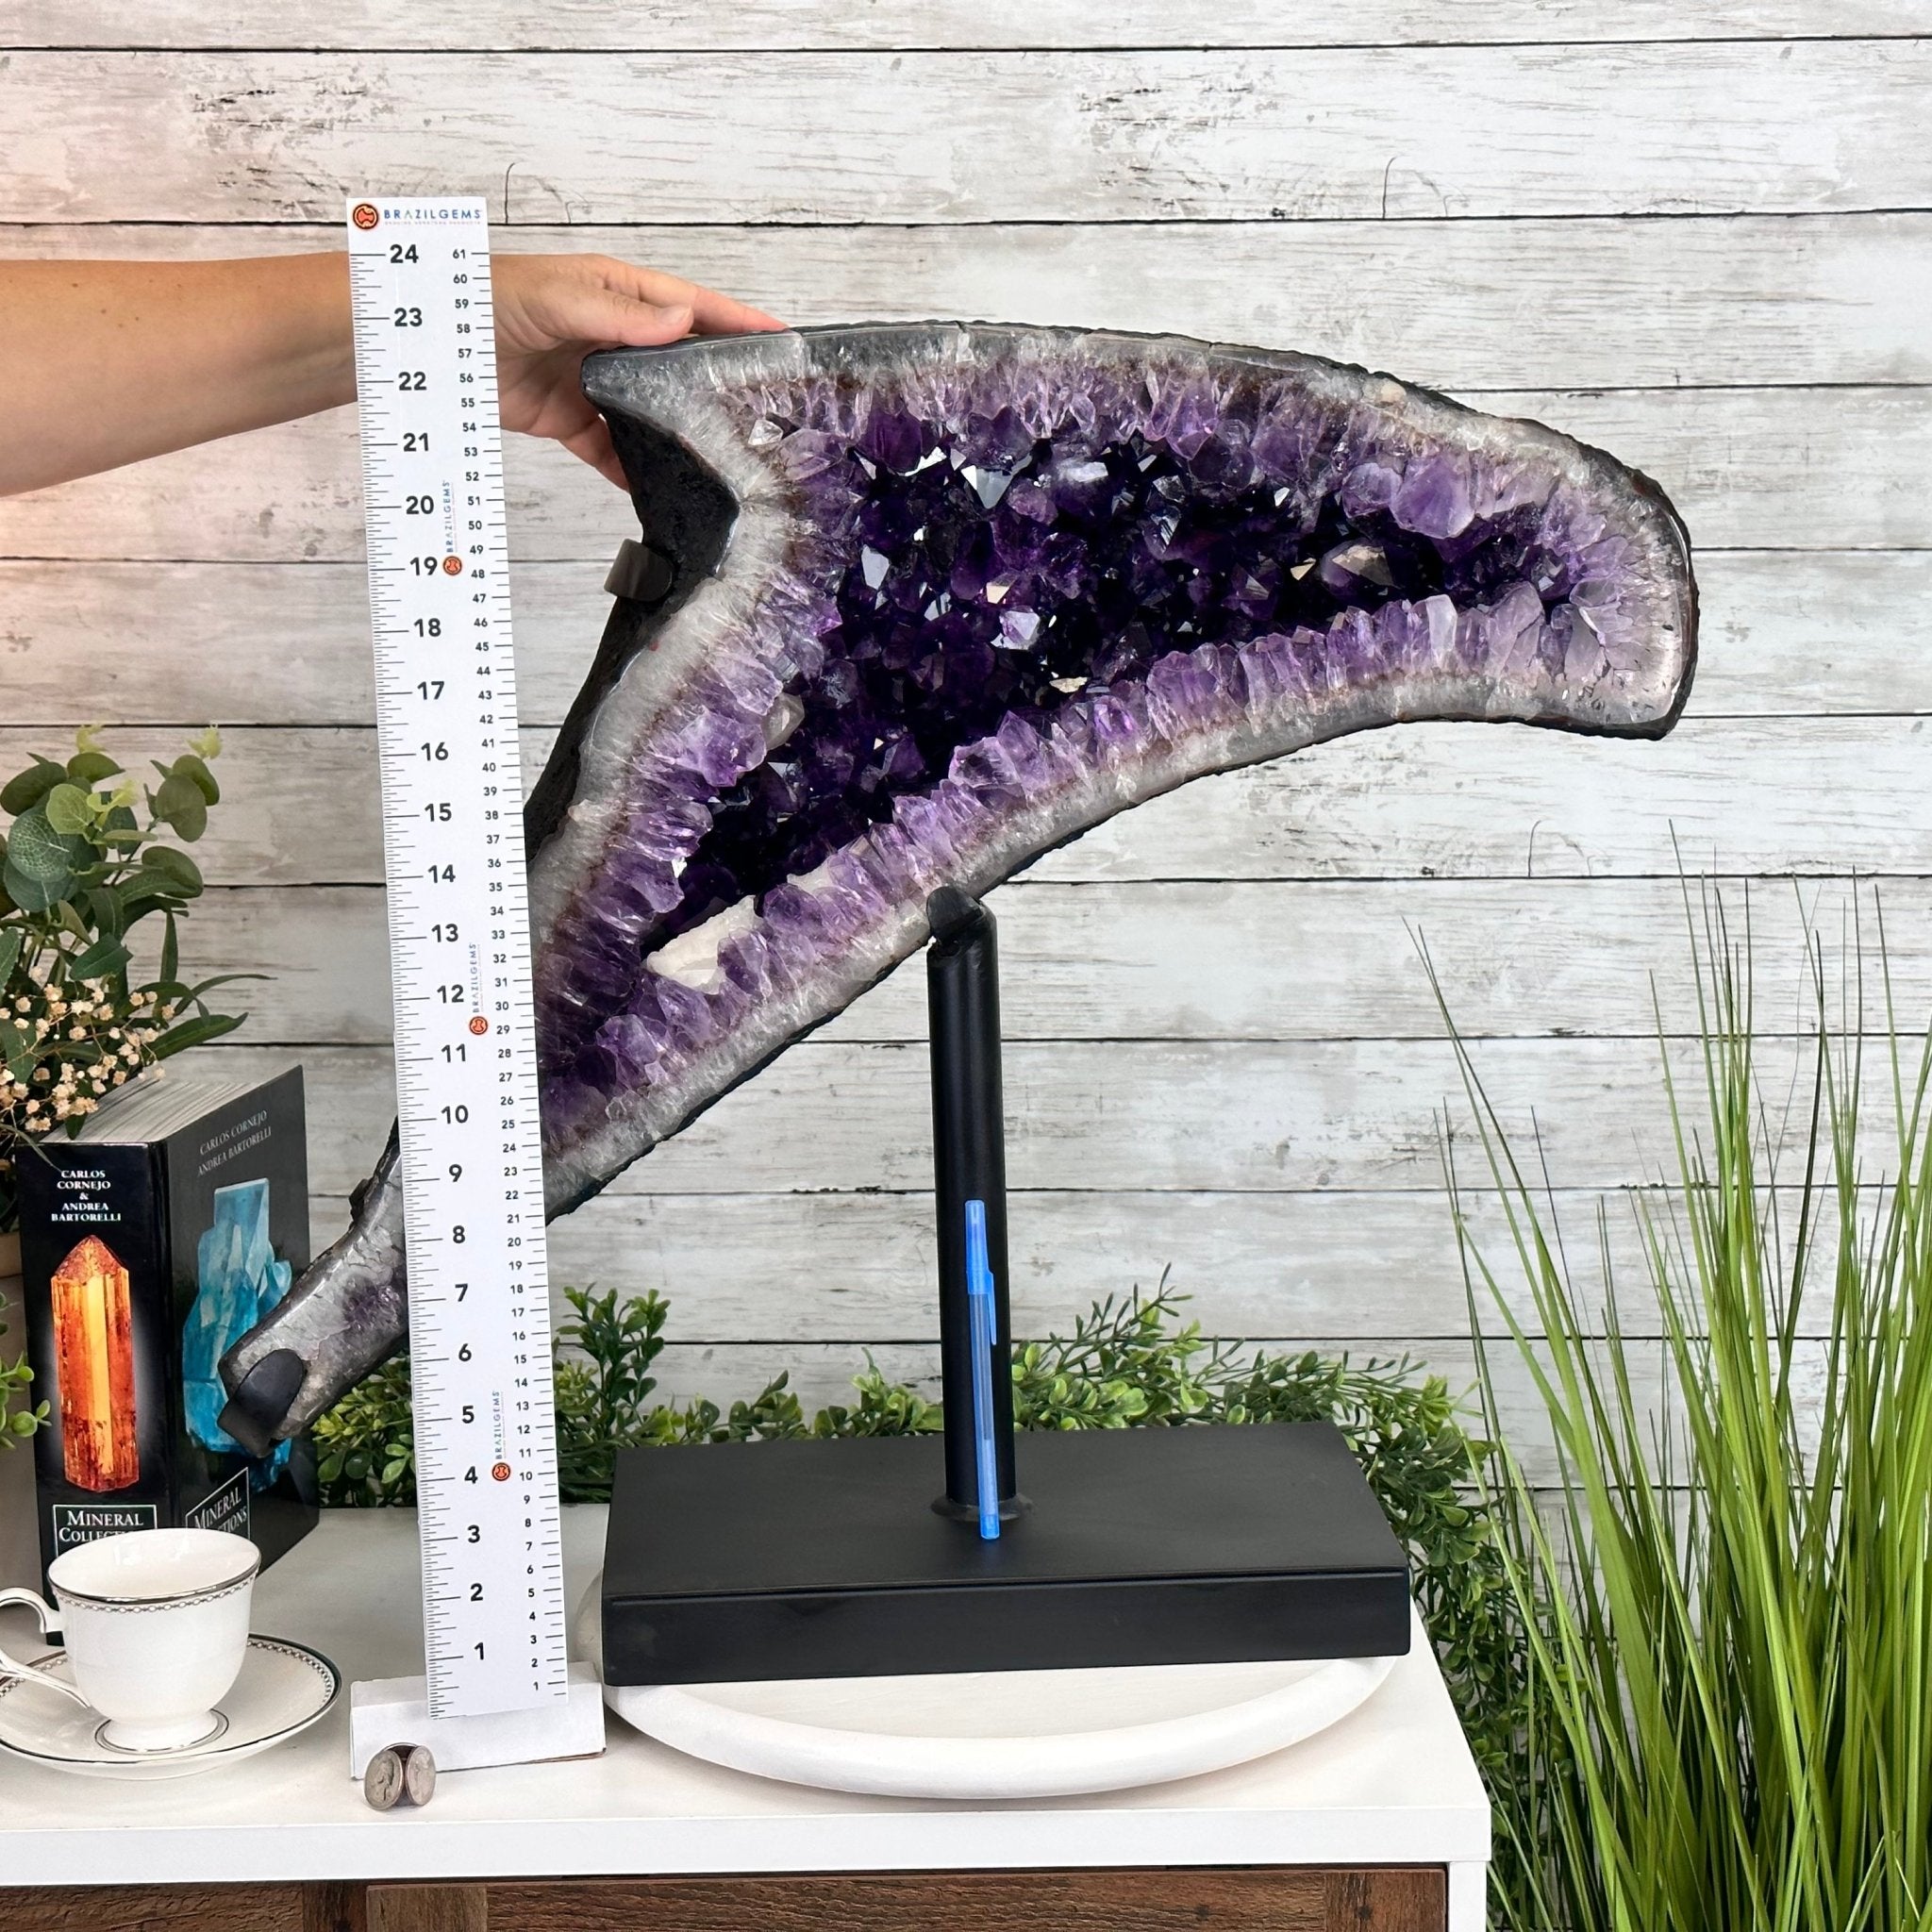 Super Quality Amethyst Cluster "Dolphin" on Metal Stand, 63.9 lbs & 23.1" tall #5491-0059 by Brazil Gems - Brazil GemsBrazil GemsSuper Quality Amethyst Cluster "Dolphin" on Metal Stand, 63.9 lbs & 23.1" tall #5491-0059 by Brazil GemsClusters on Fixed Bases5491-0059